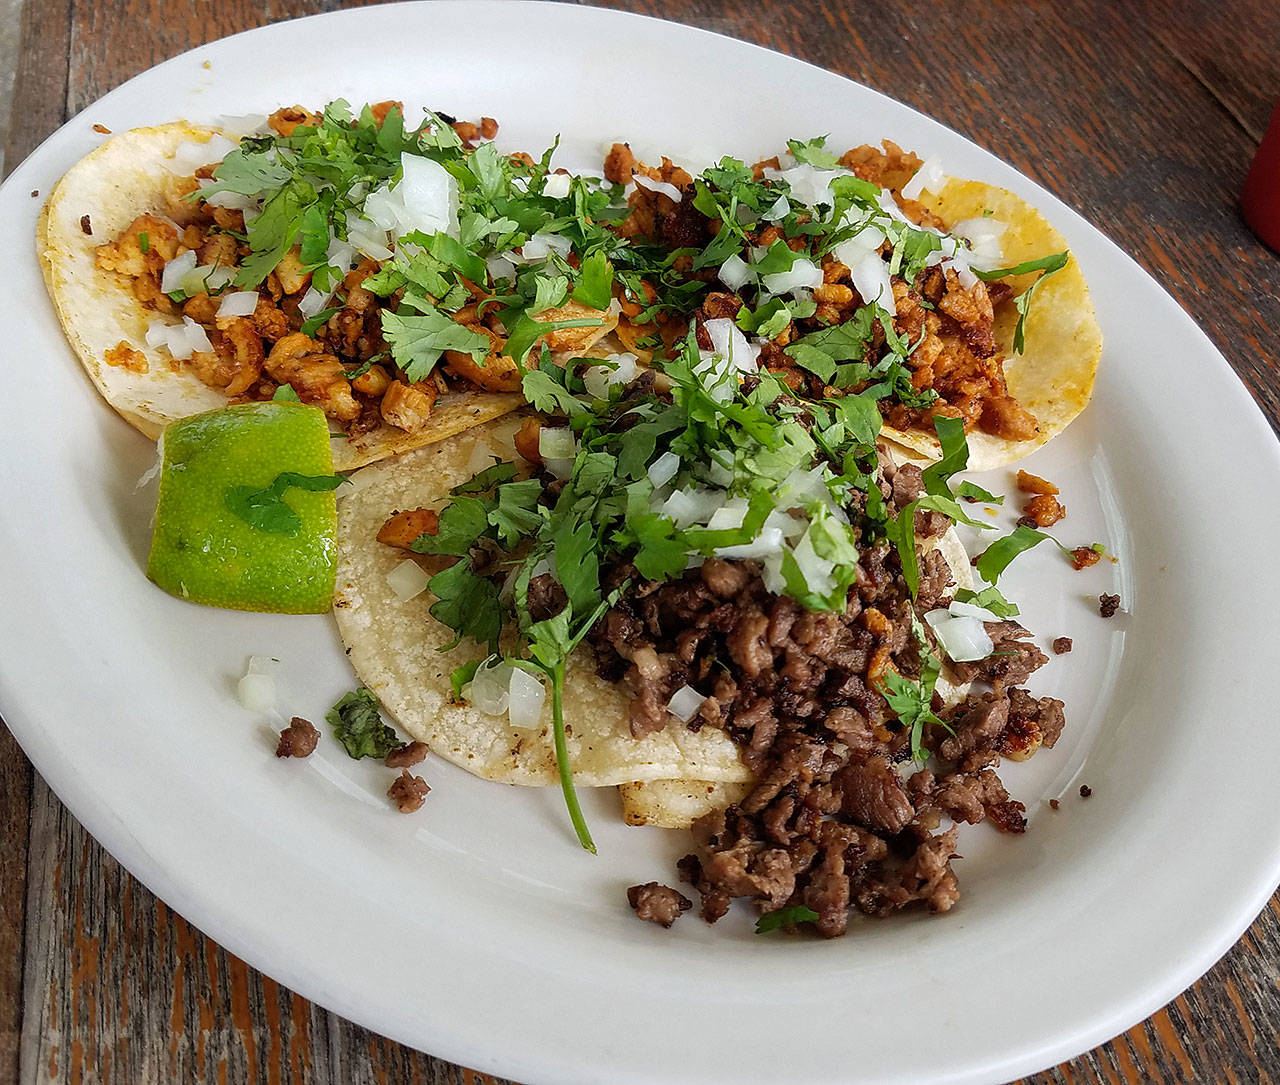 La Carreta offers a number of taco combinations, including these with chicken, beef and pork. Sharon Salyer/The Herald